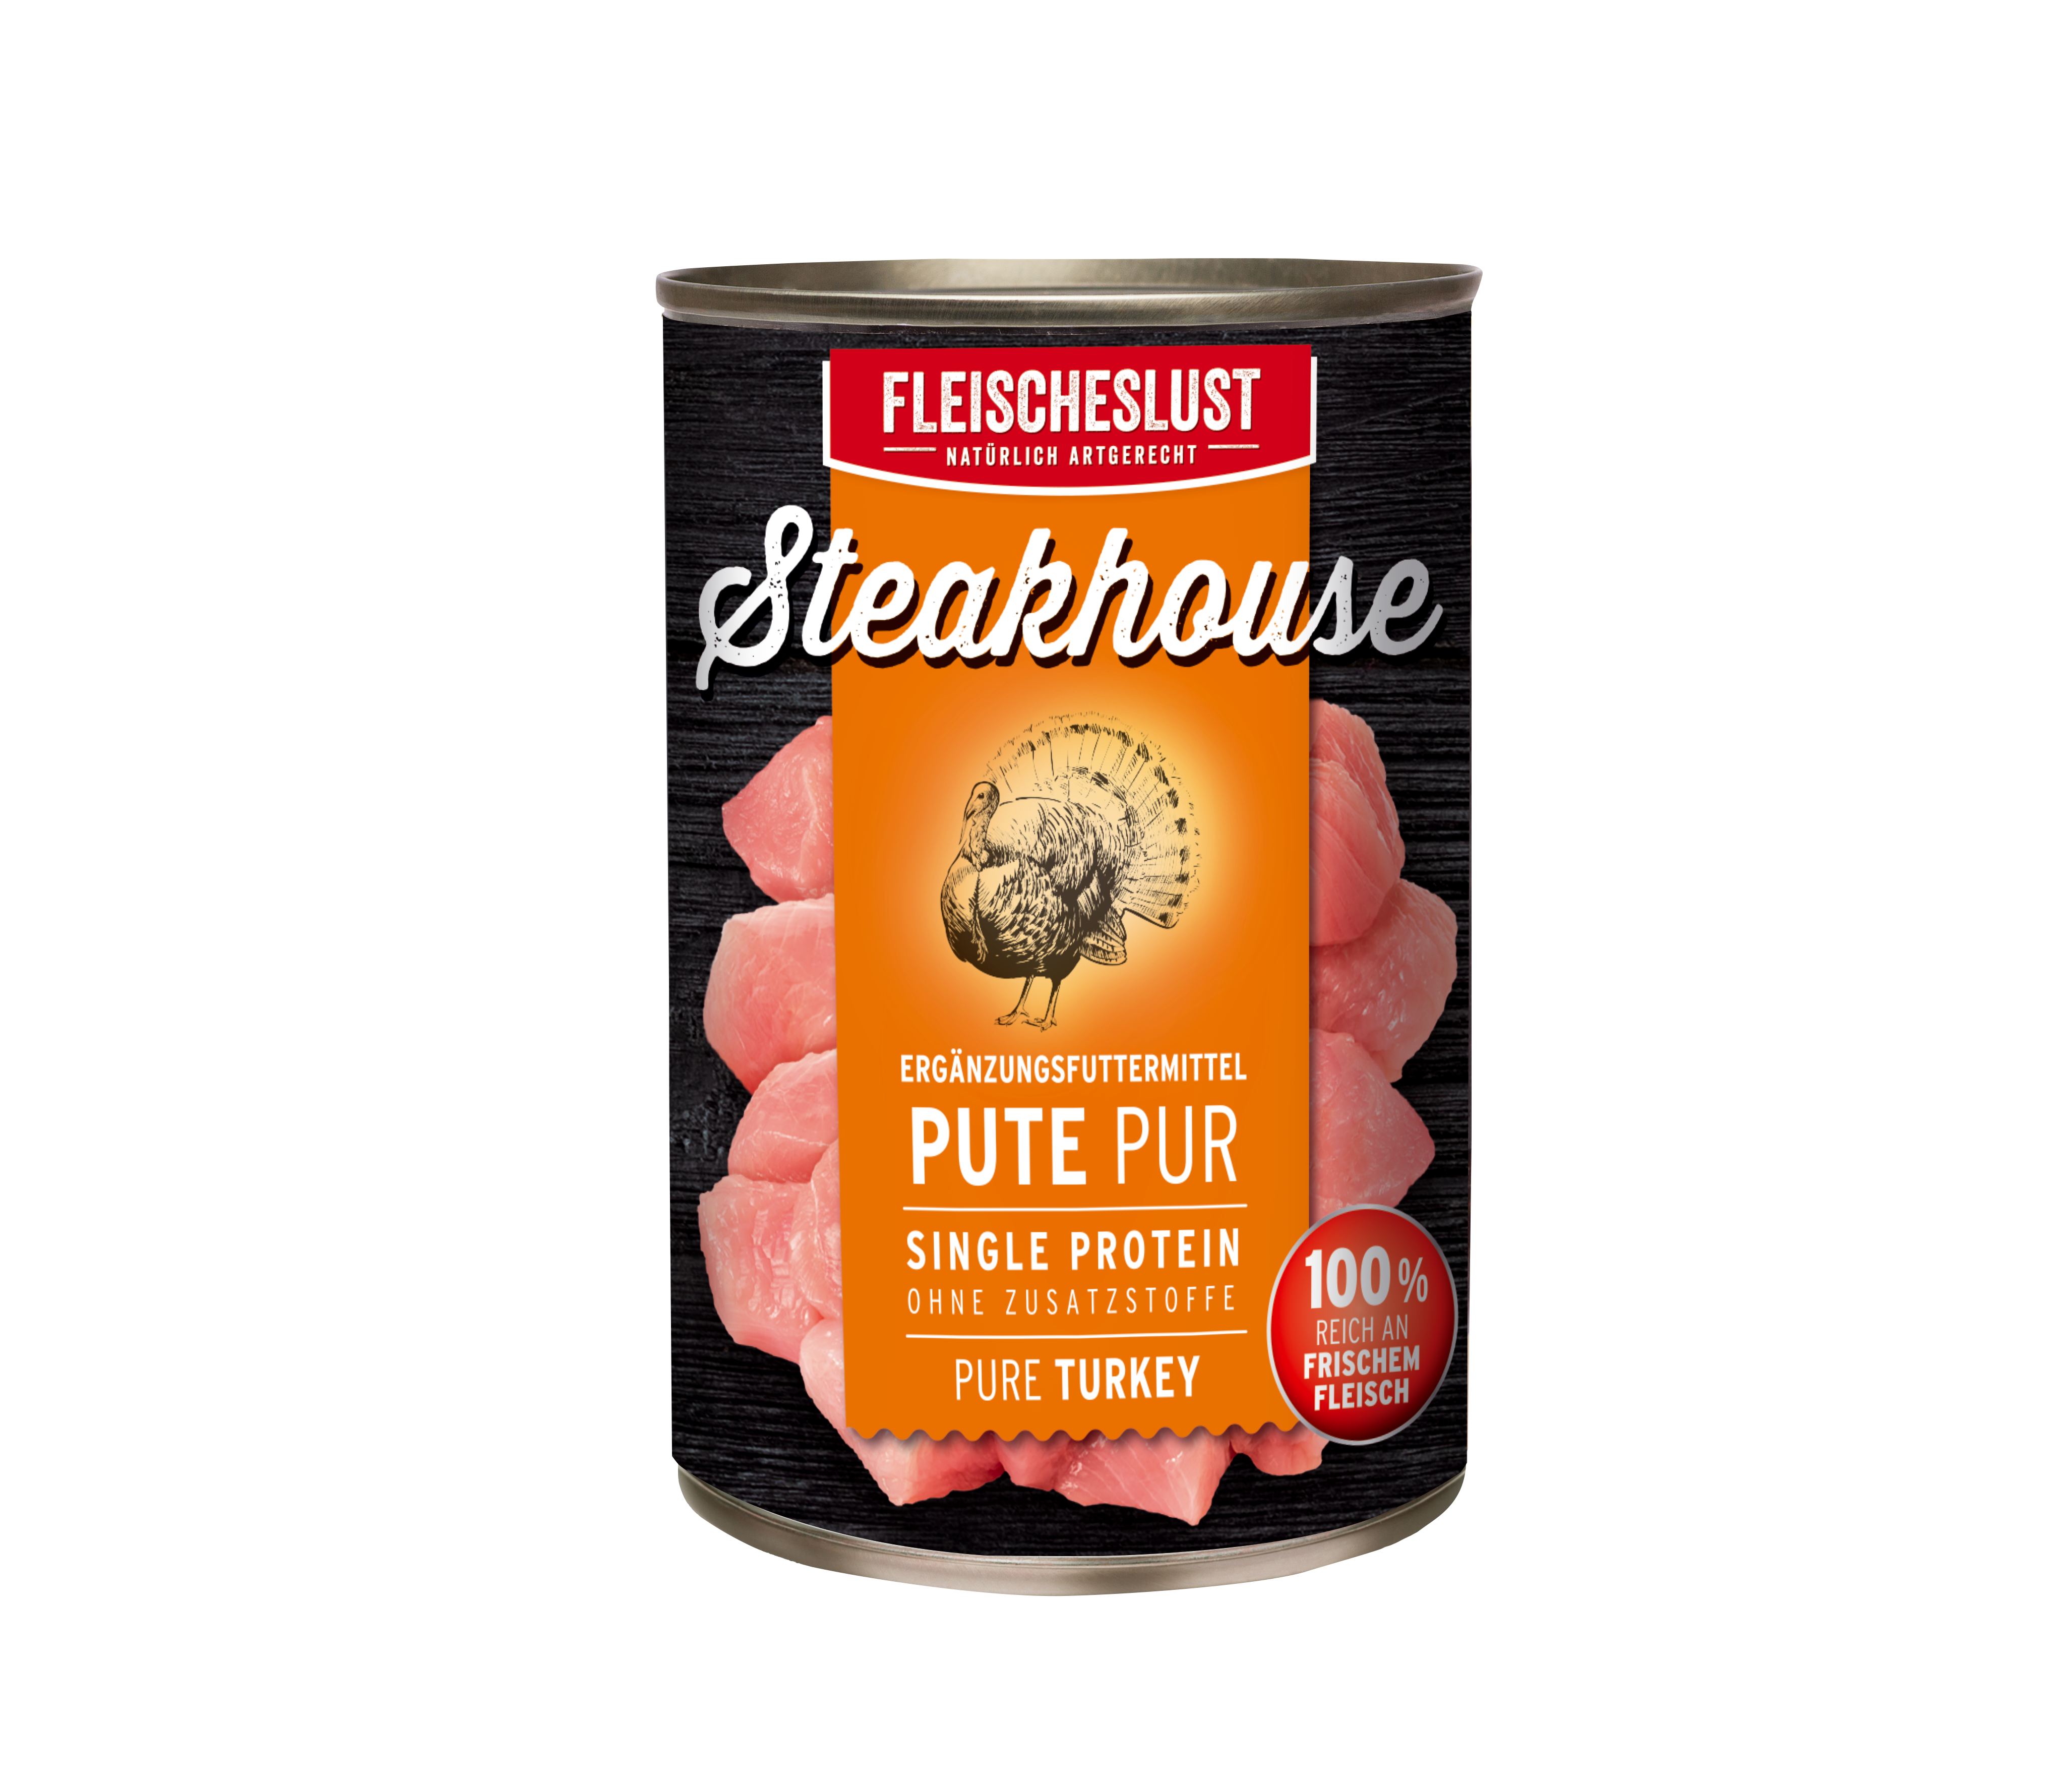 Steakhouse Pute pur